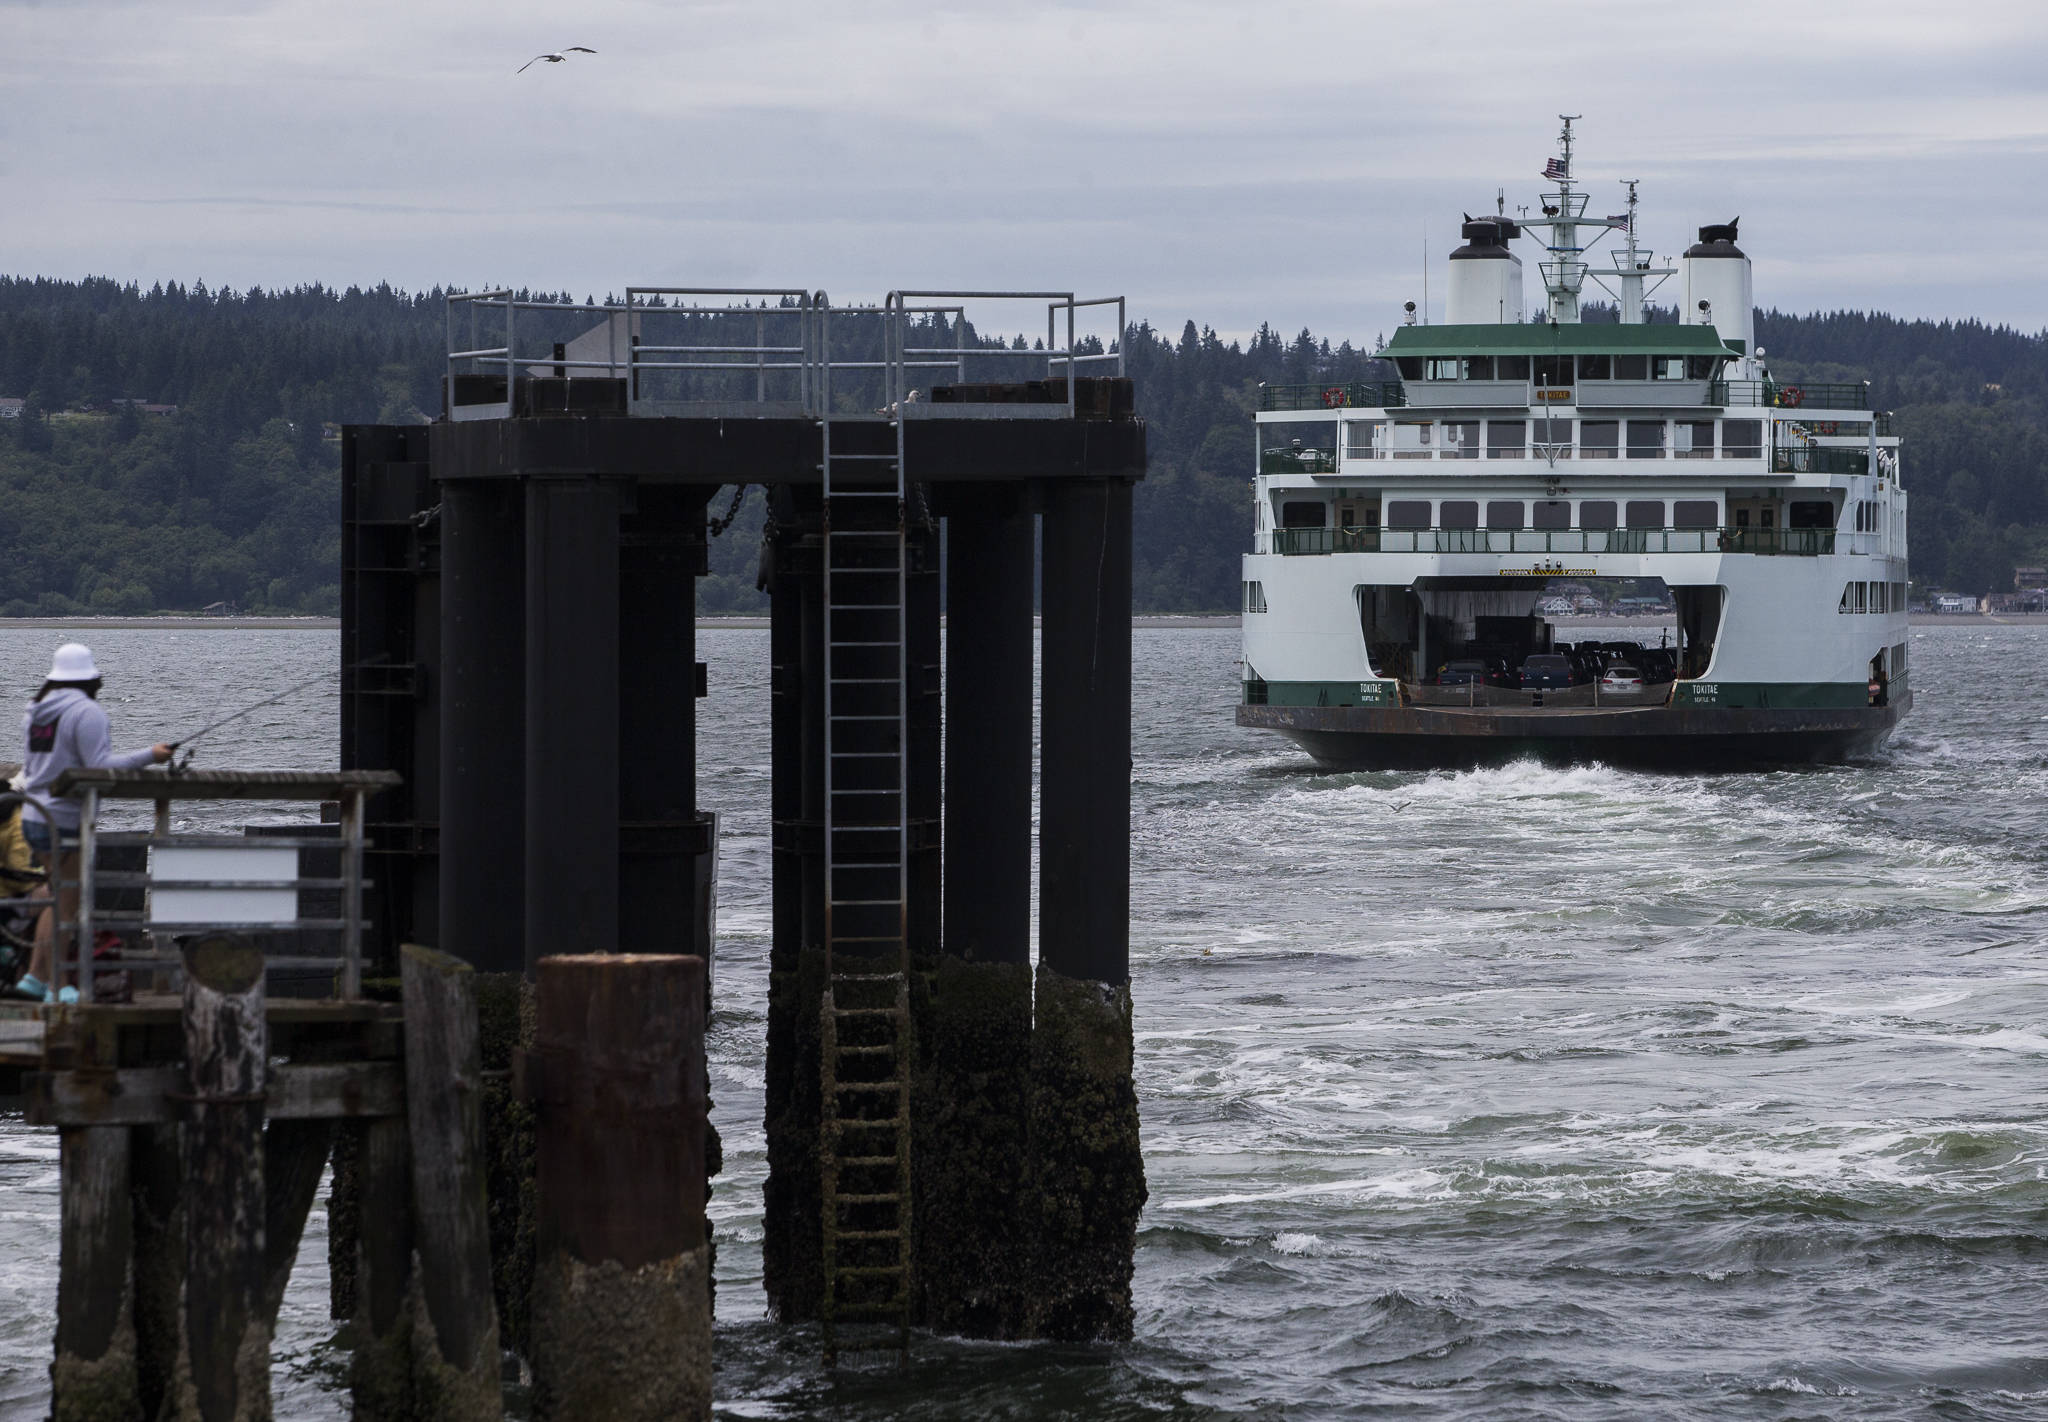 A ferry pulls away from the dock in Mukilteo last Friday. (Olivia Vanni / The Herald)